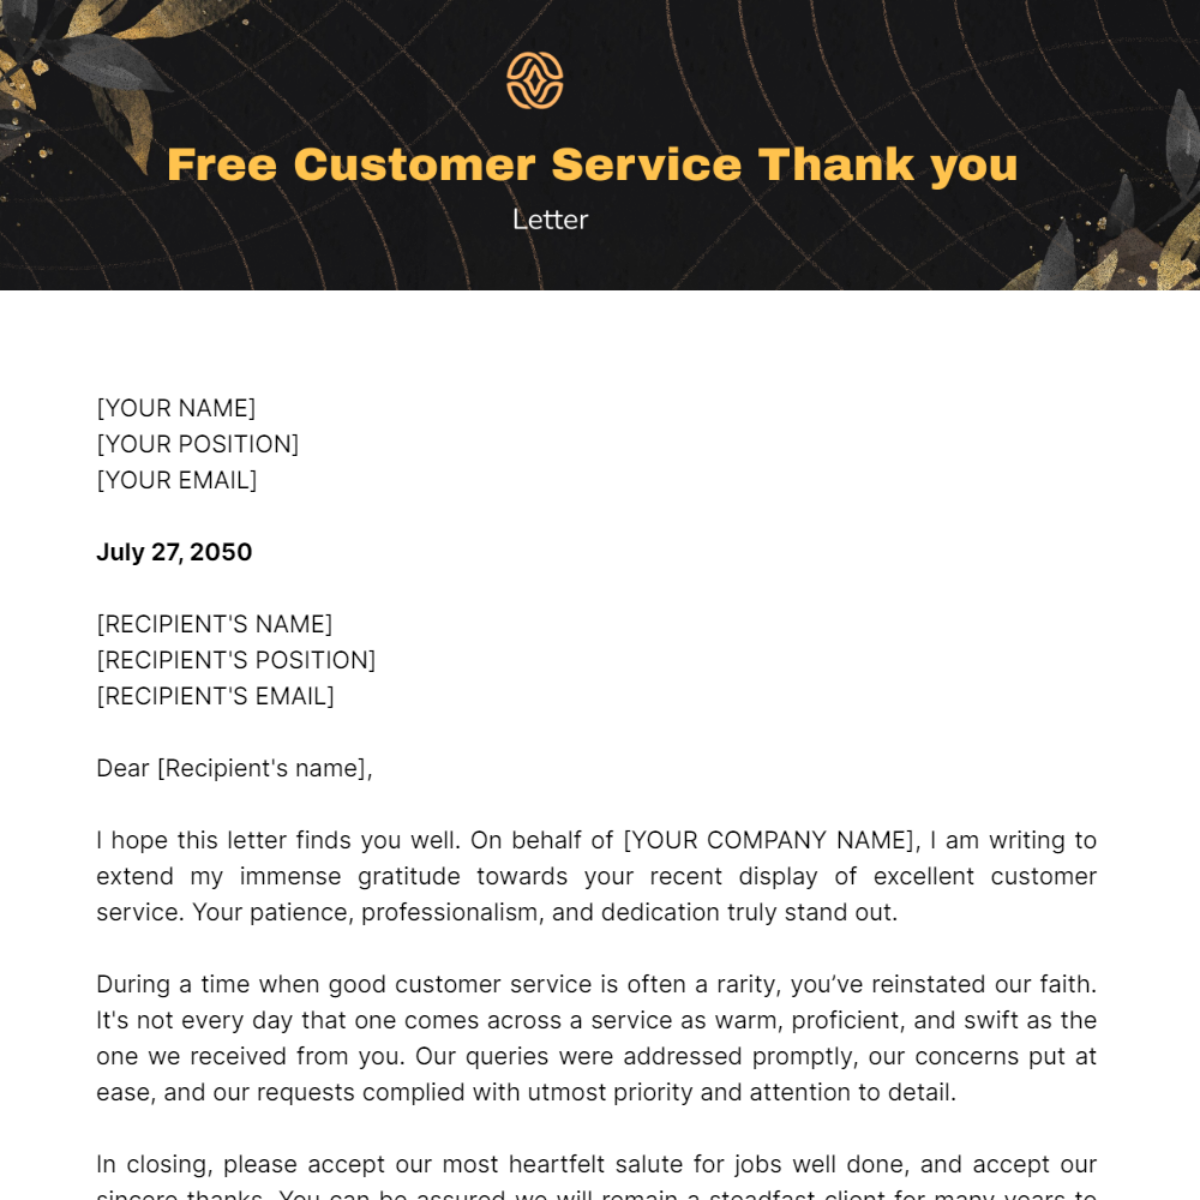 Customer Service Thank you Letter Template